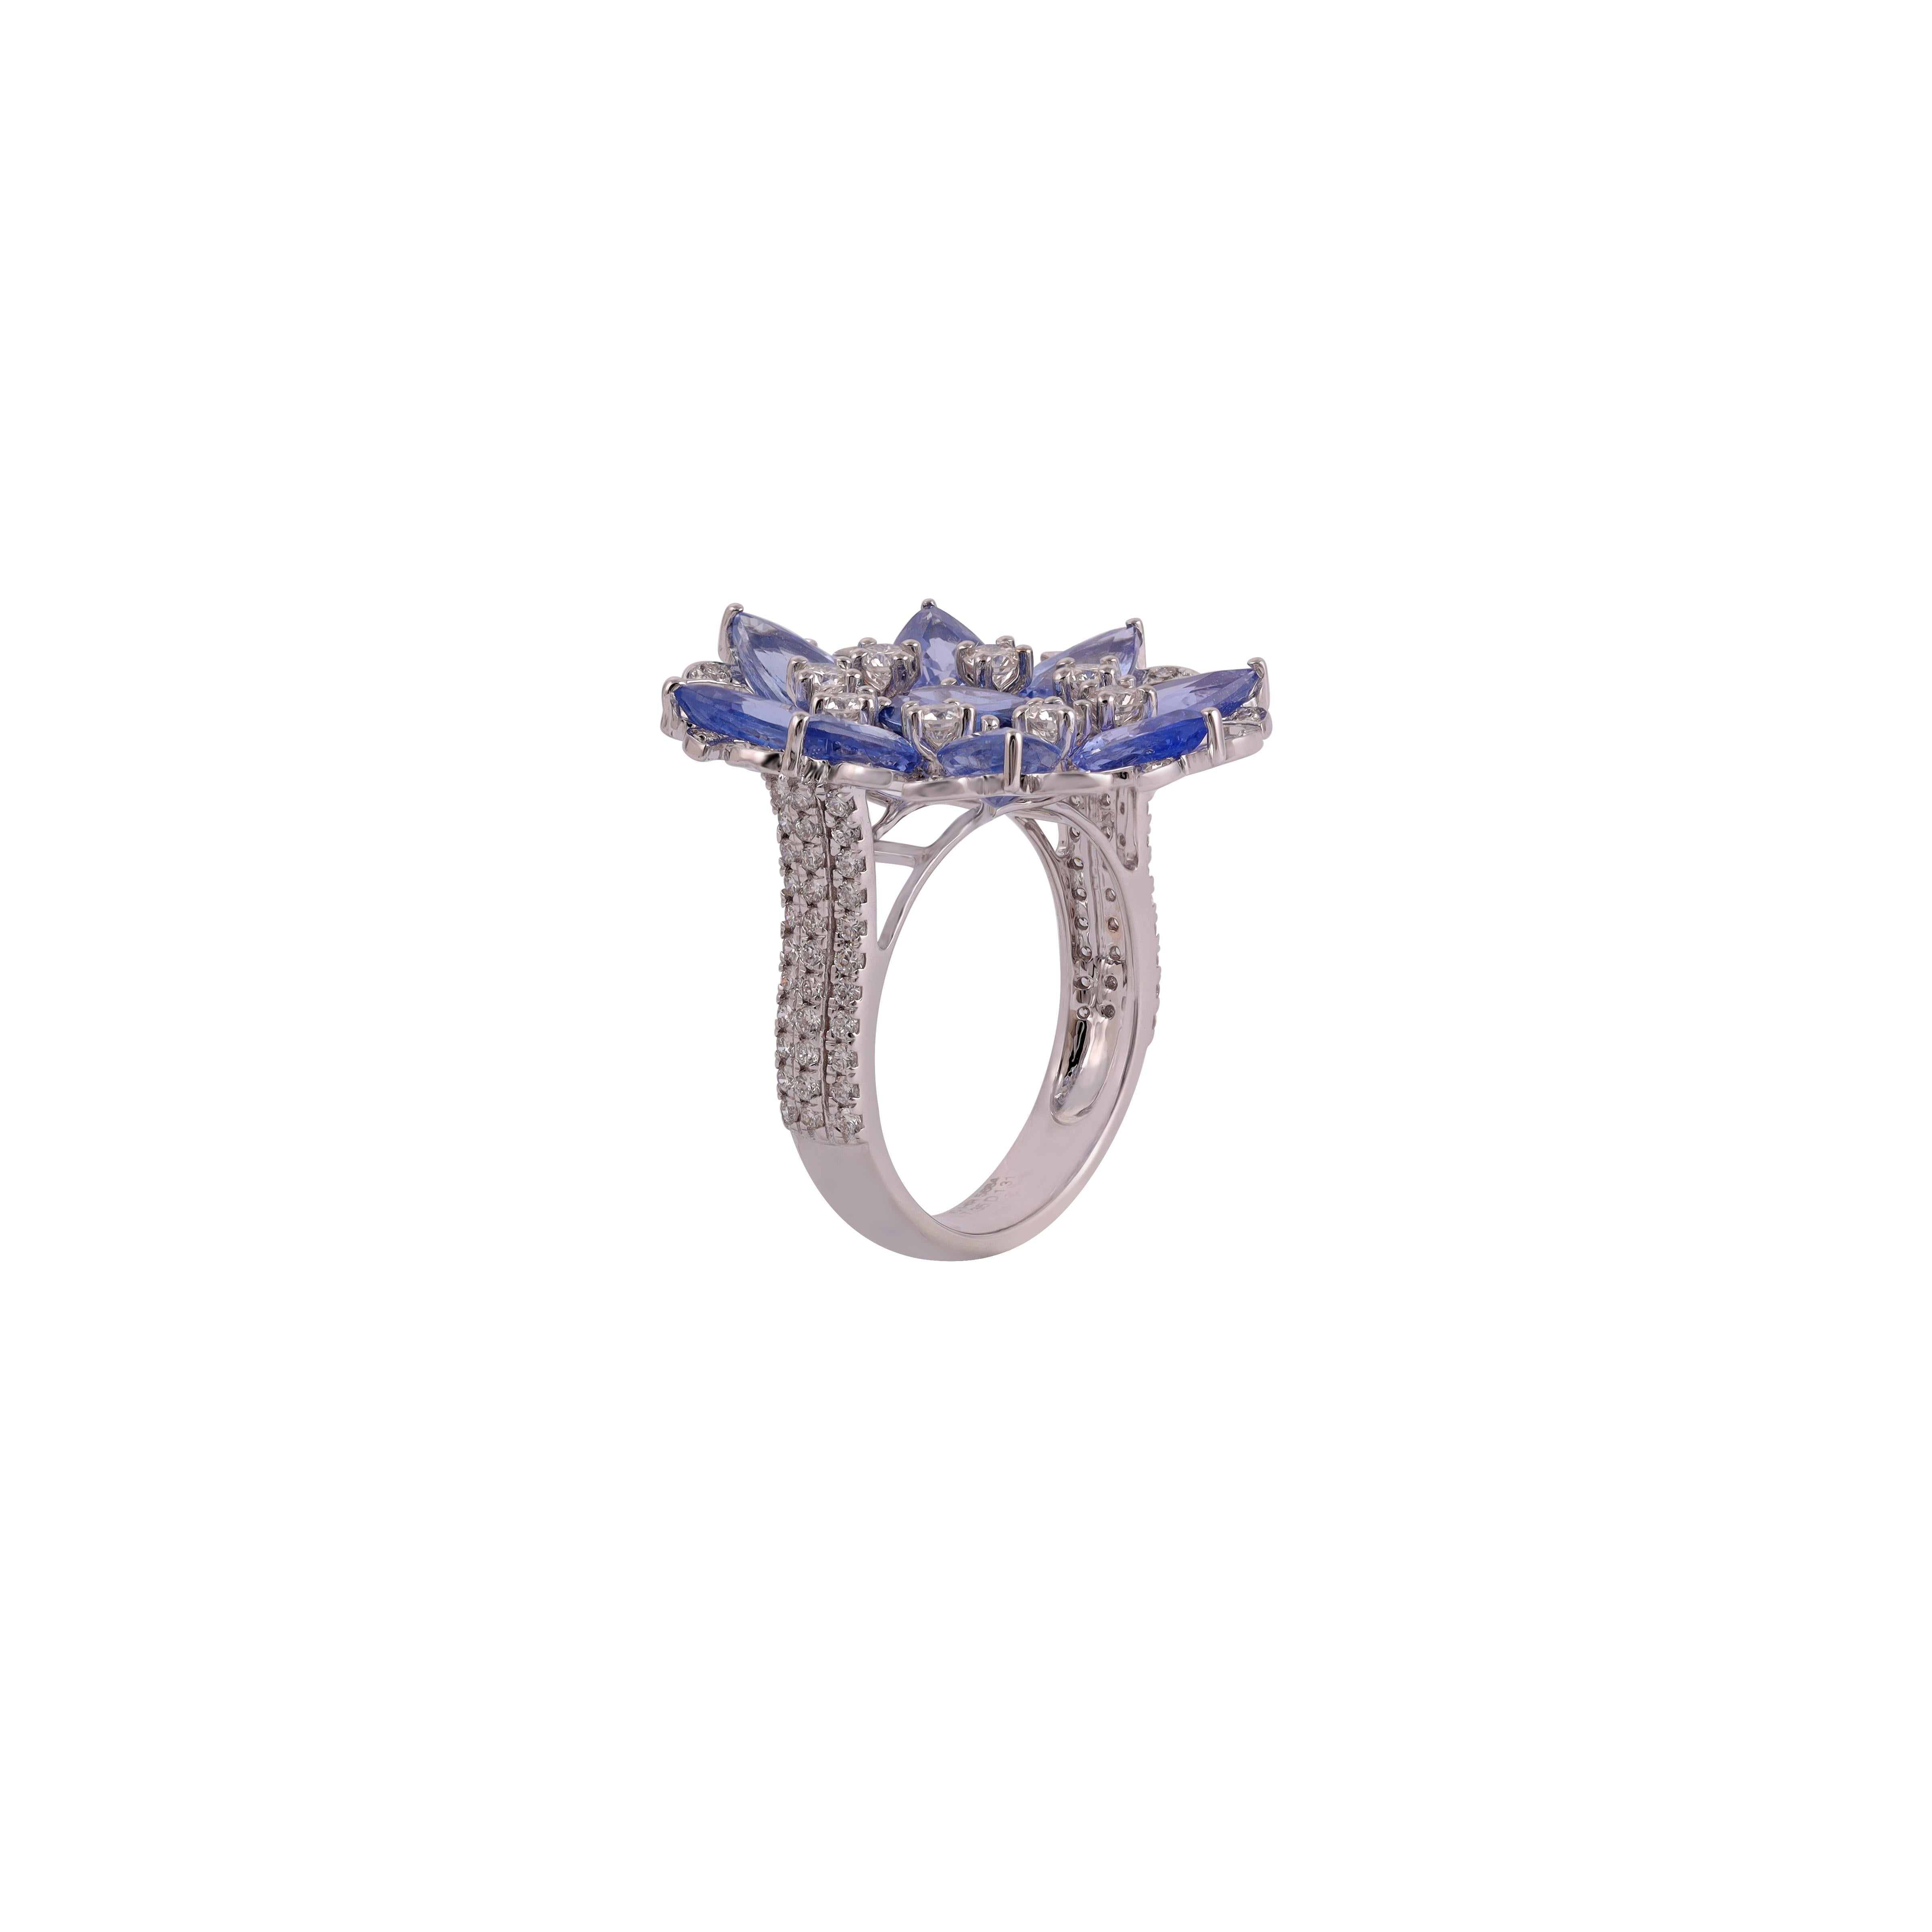 Flower Design Sapphire Ring Studded with Diamond in 18k White Gold In New Condition For Sale In Jaipur, Rajasthan